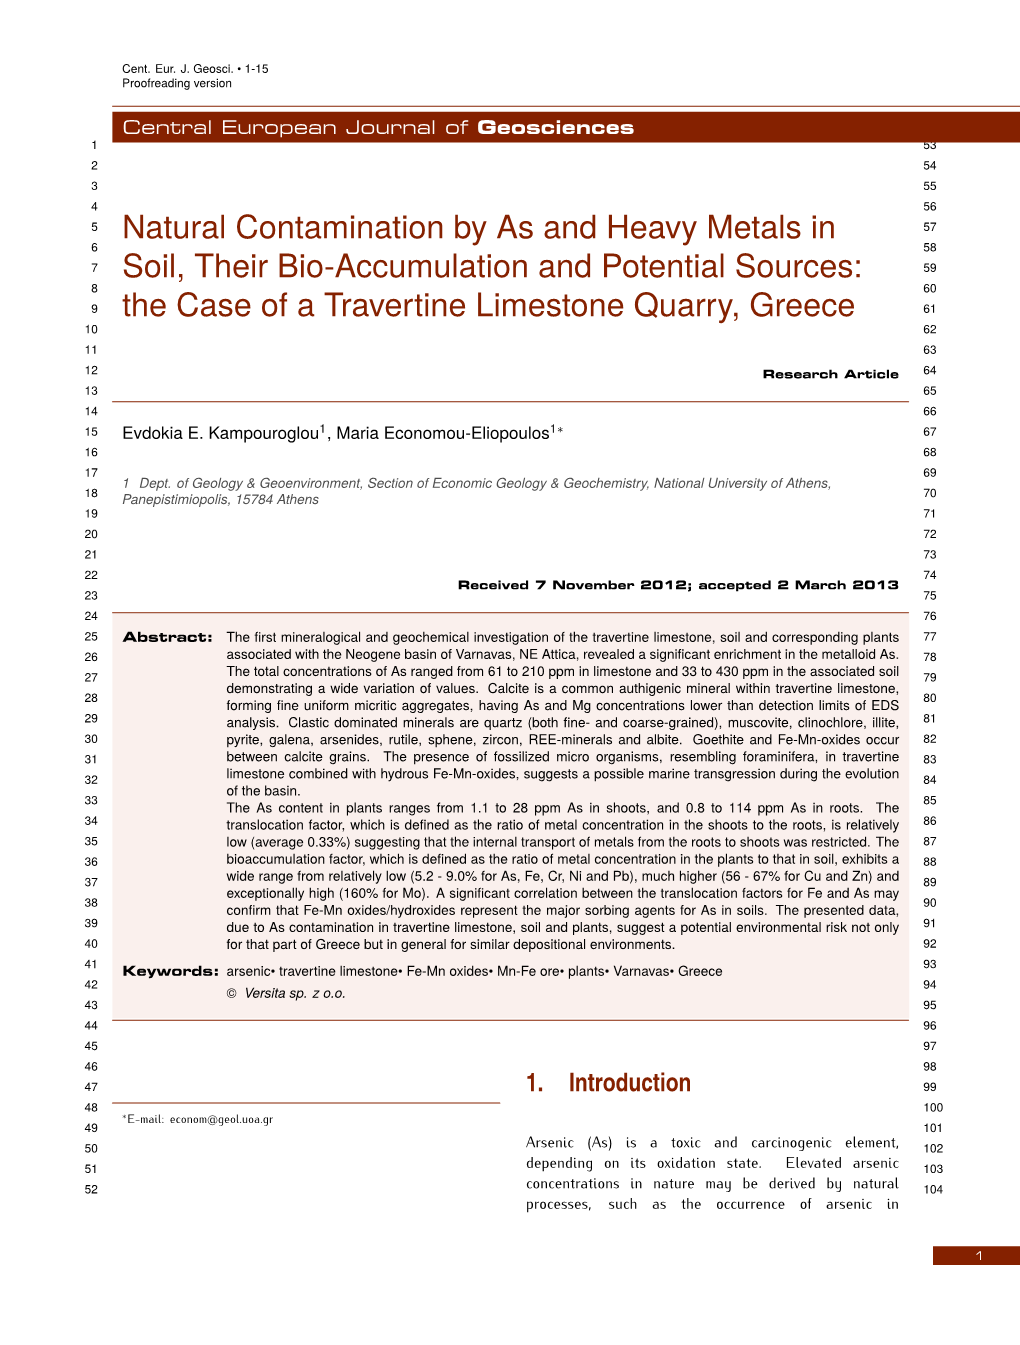 Natural Contamination by As and Heavy Metals in Soil, Their Bio-Accumulation and Potential Sources